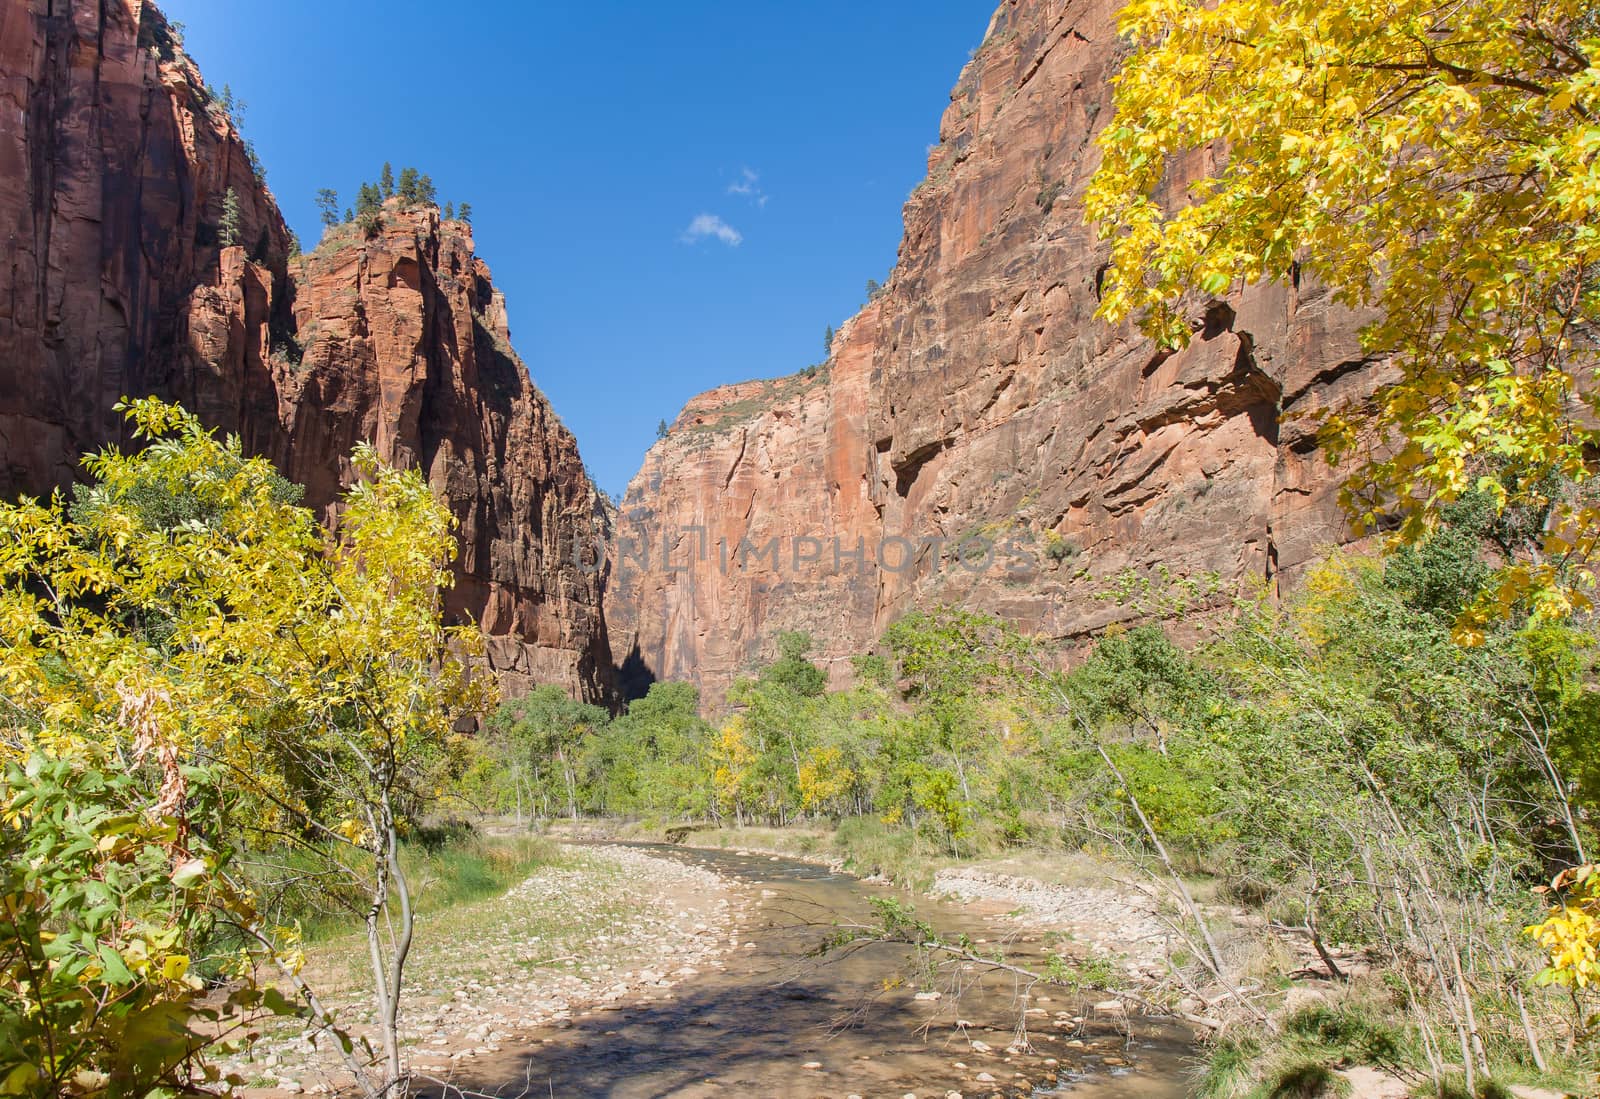 Zion National Park provides enthralling and unbelievable sights, but also provides scenes of peace and tranquility.